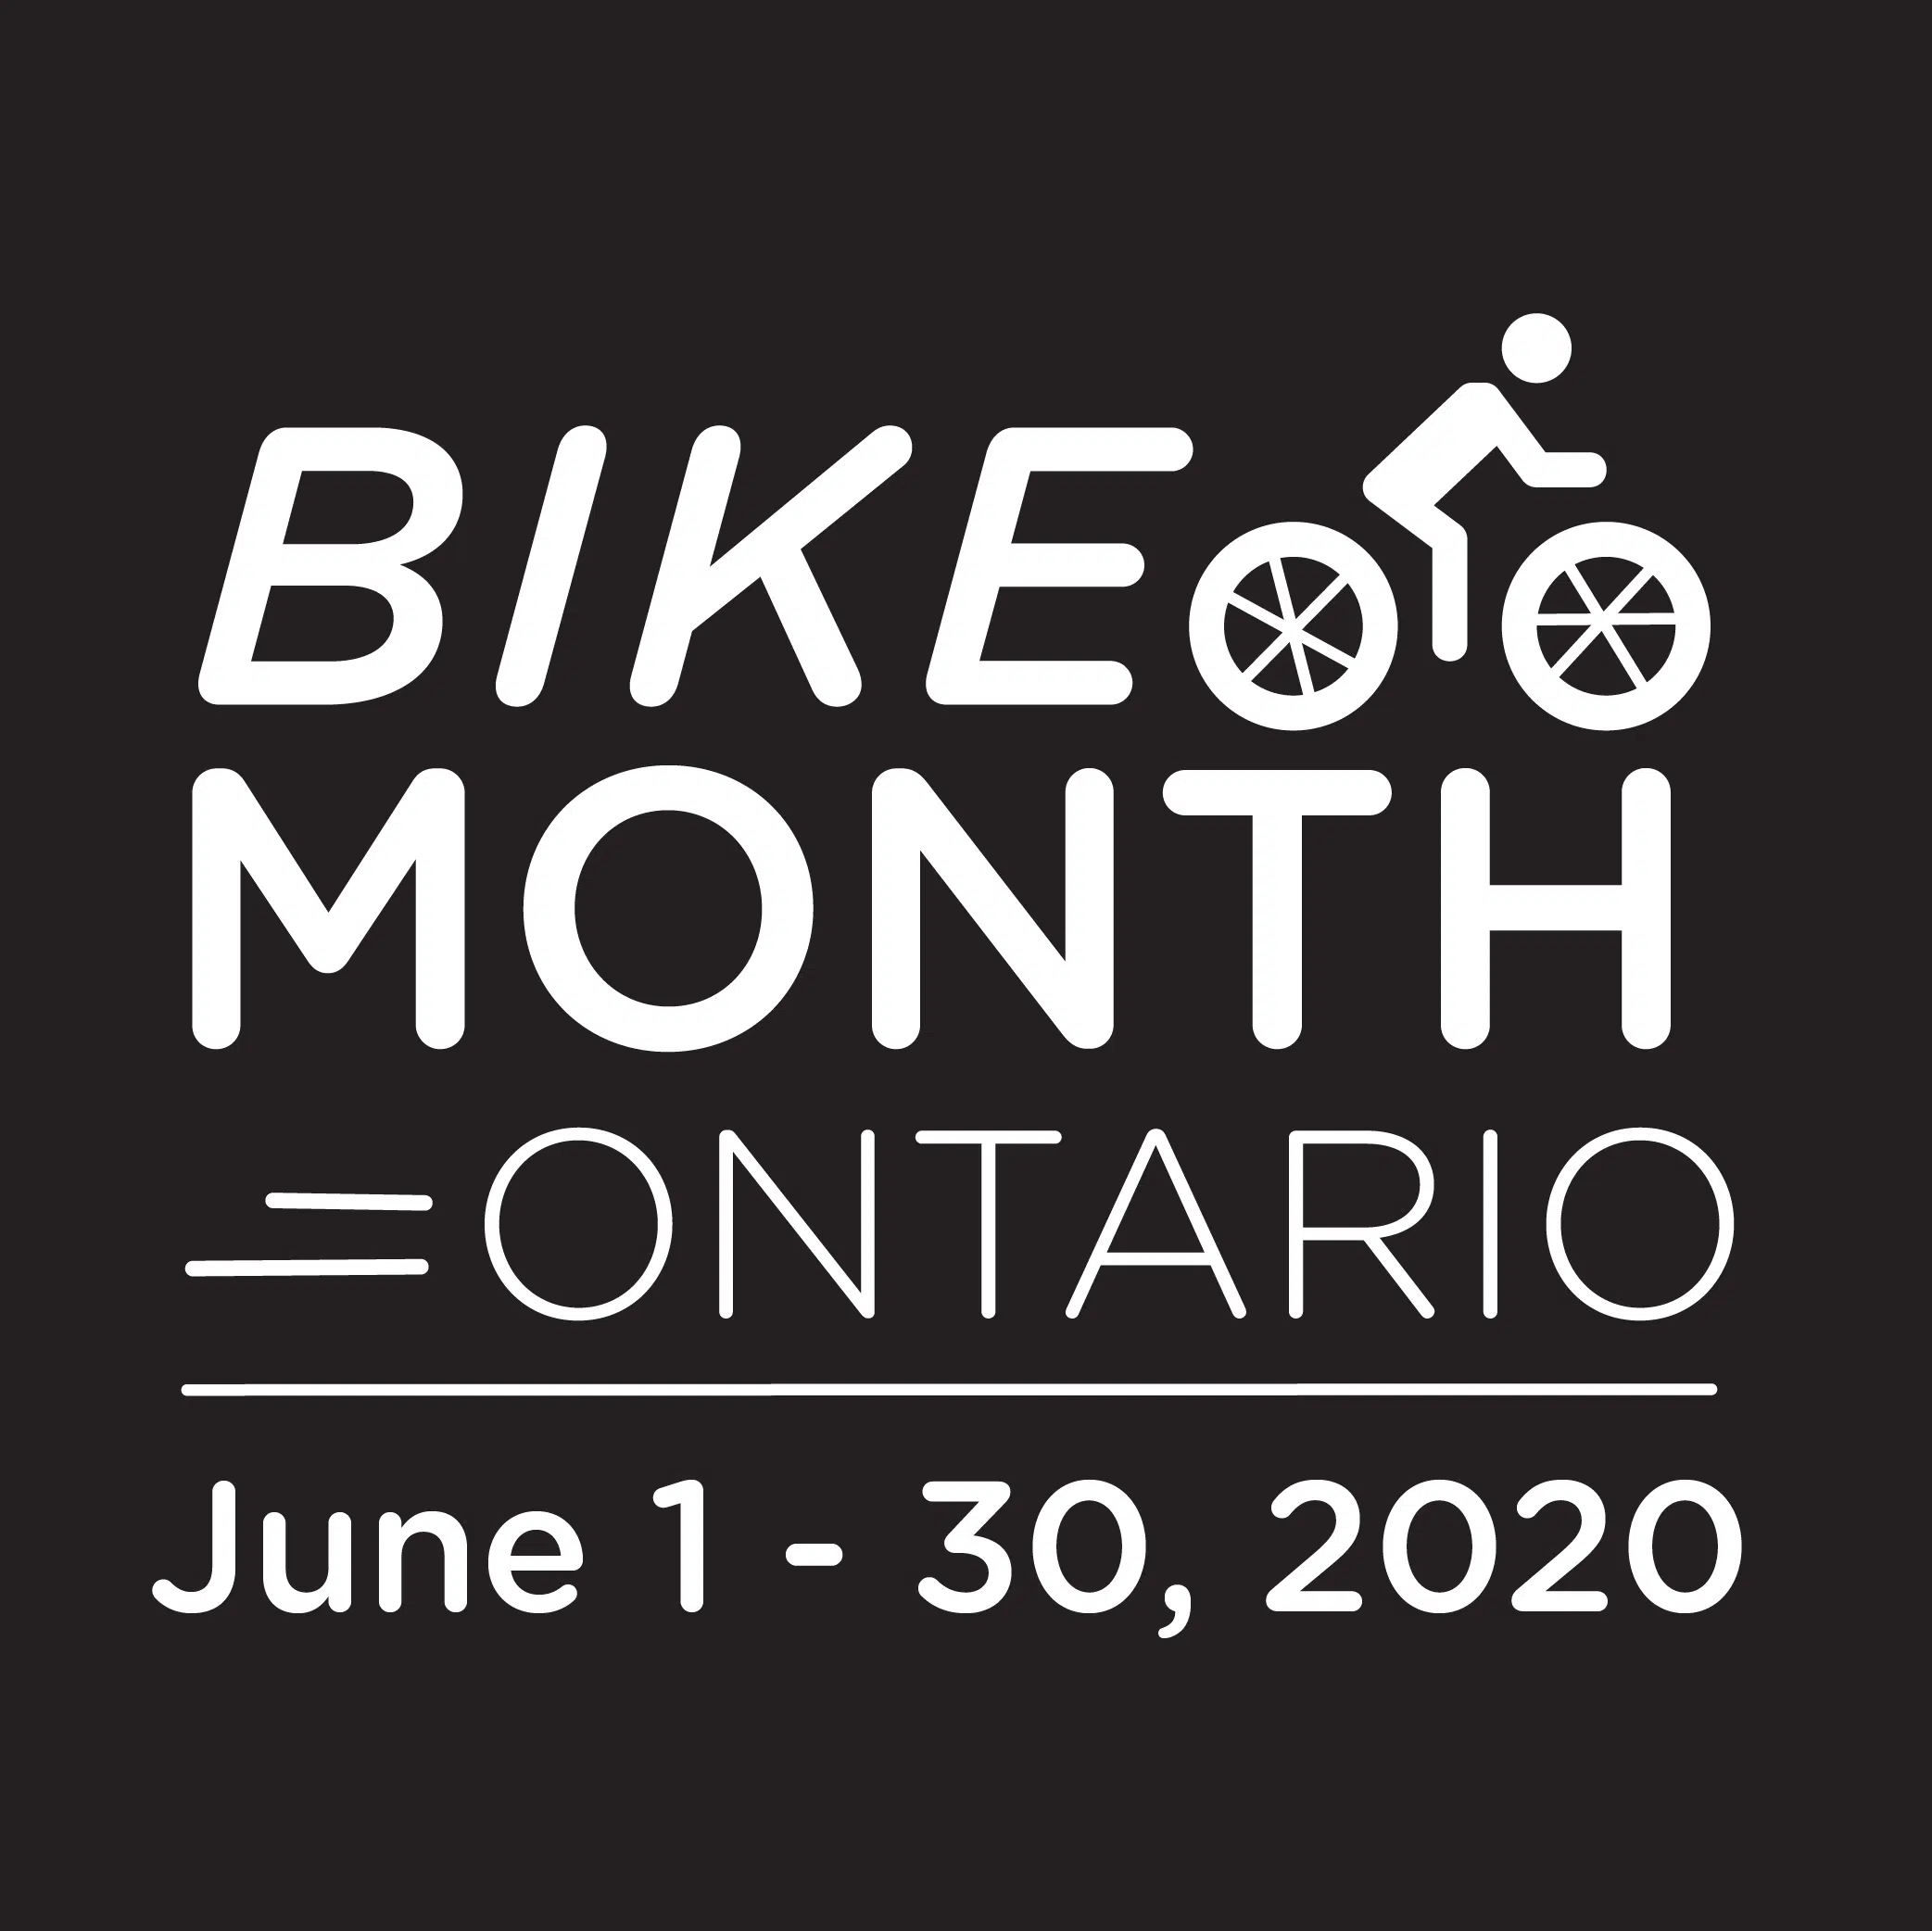 Bike Month Ontario launched through SustainMobility